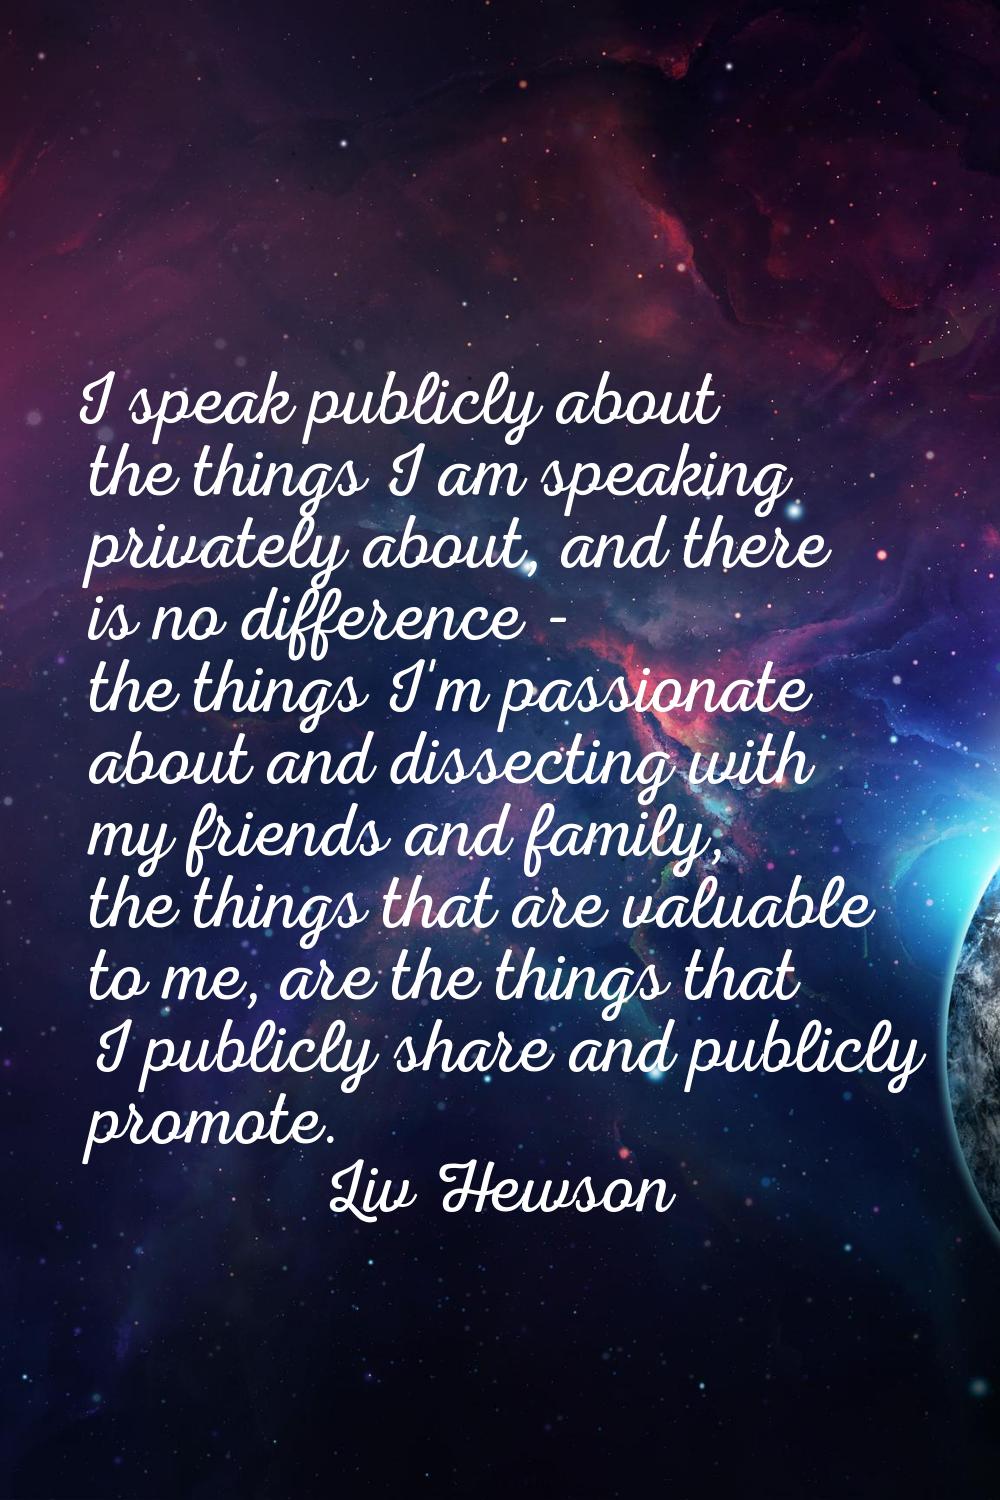 I speak publicly about the things I am speaking privately about, and there is no difference - the t